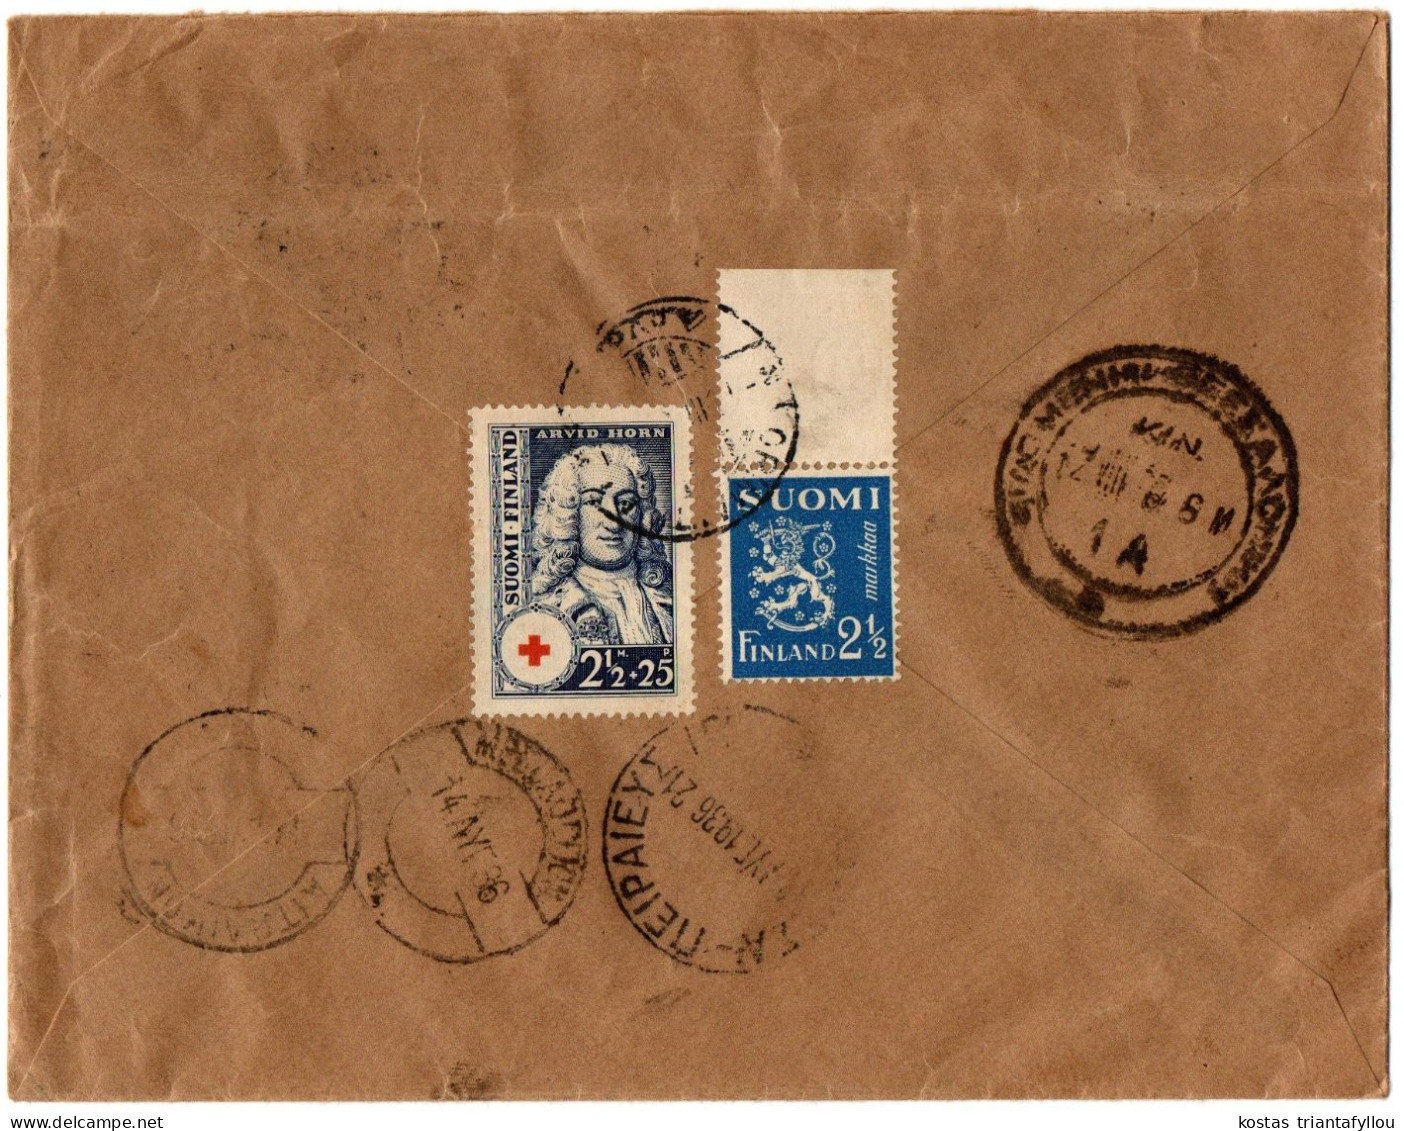 1,45 FINLAND, 1936, COVER TO GREECE - Covers & Documents